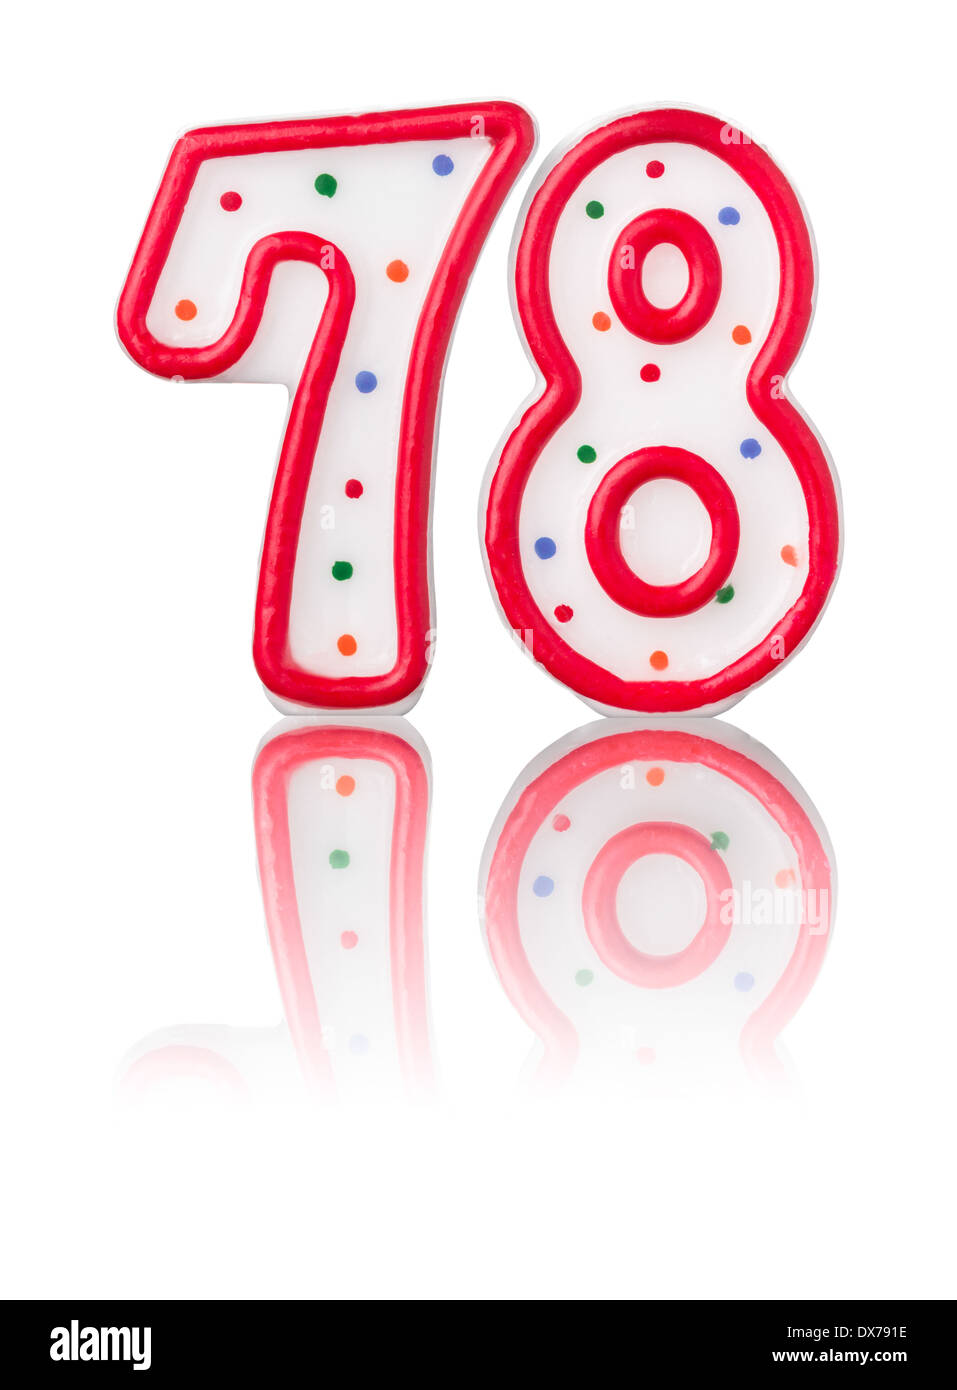 Red number 78 with reflection on a white background Stock Photo